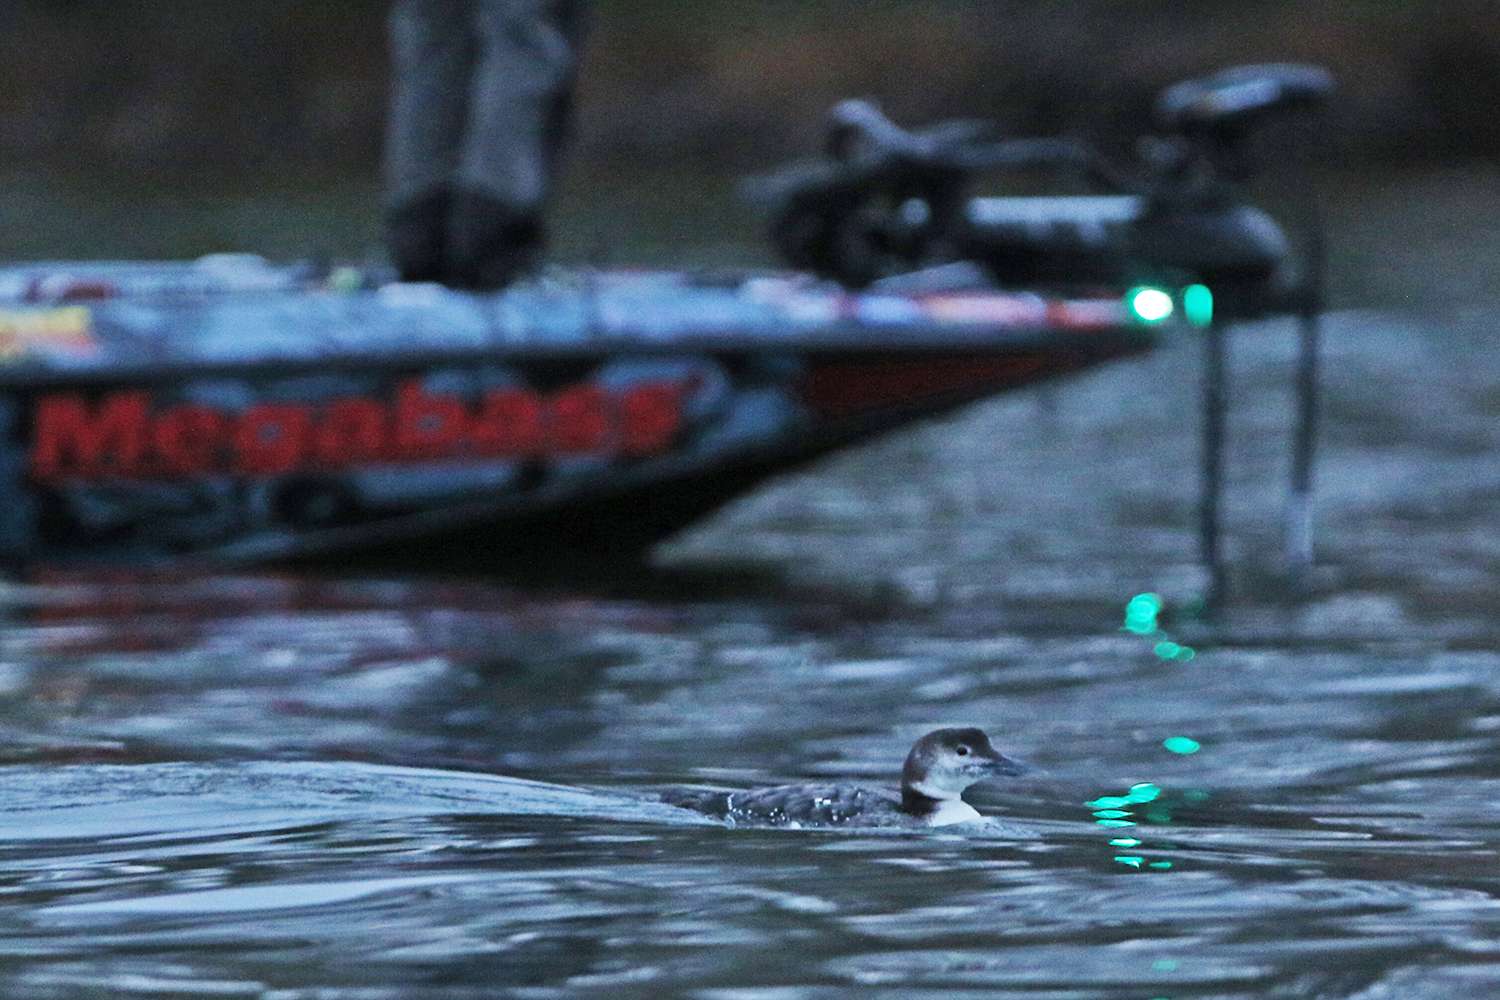 Another juvenile loon at Lake Lanier, that's Chris Zaldain's boat int he background.